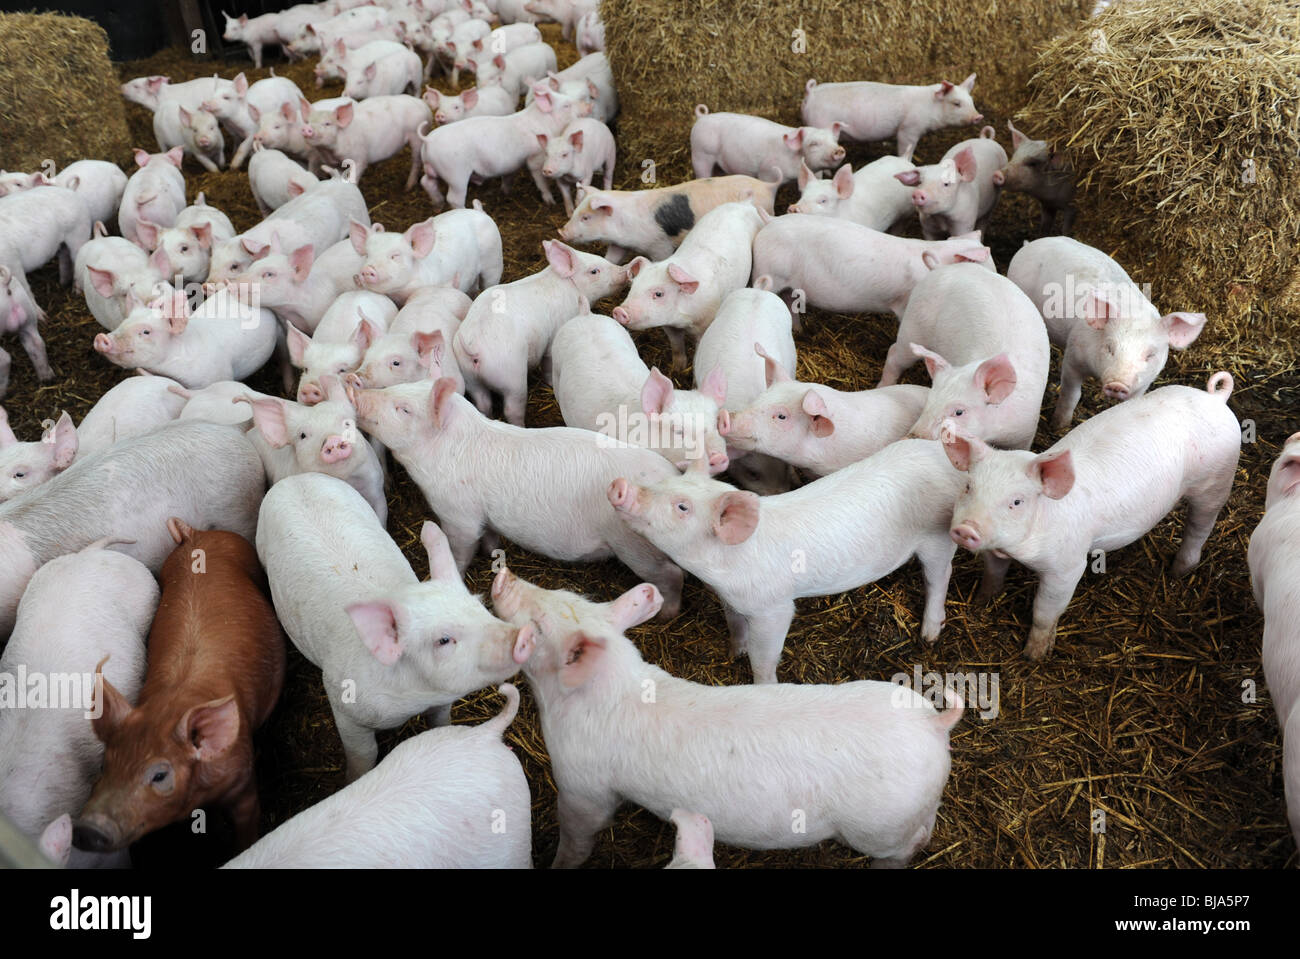 Weaner pigs reared at Herefordshire farm Stock Photo